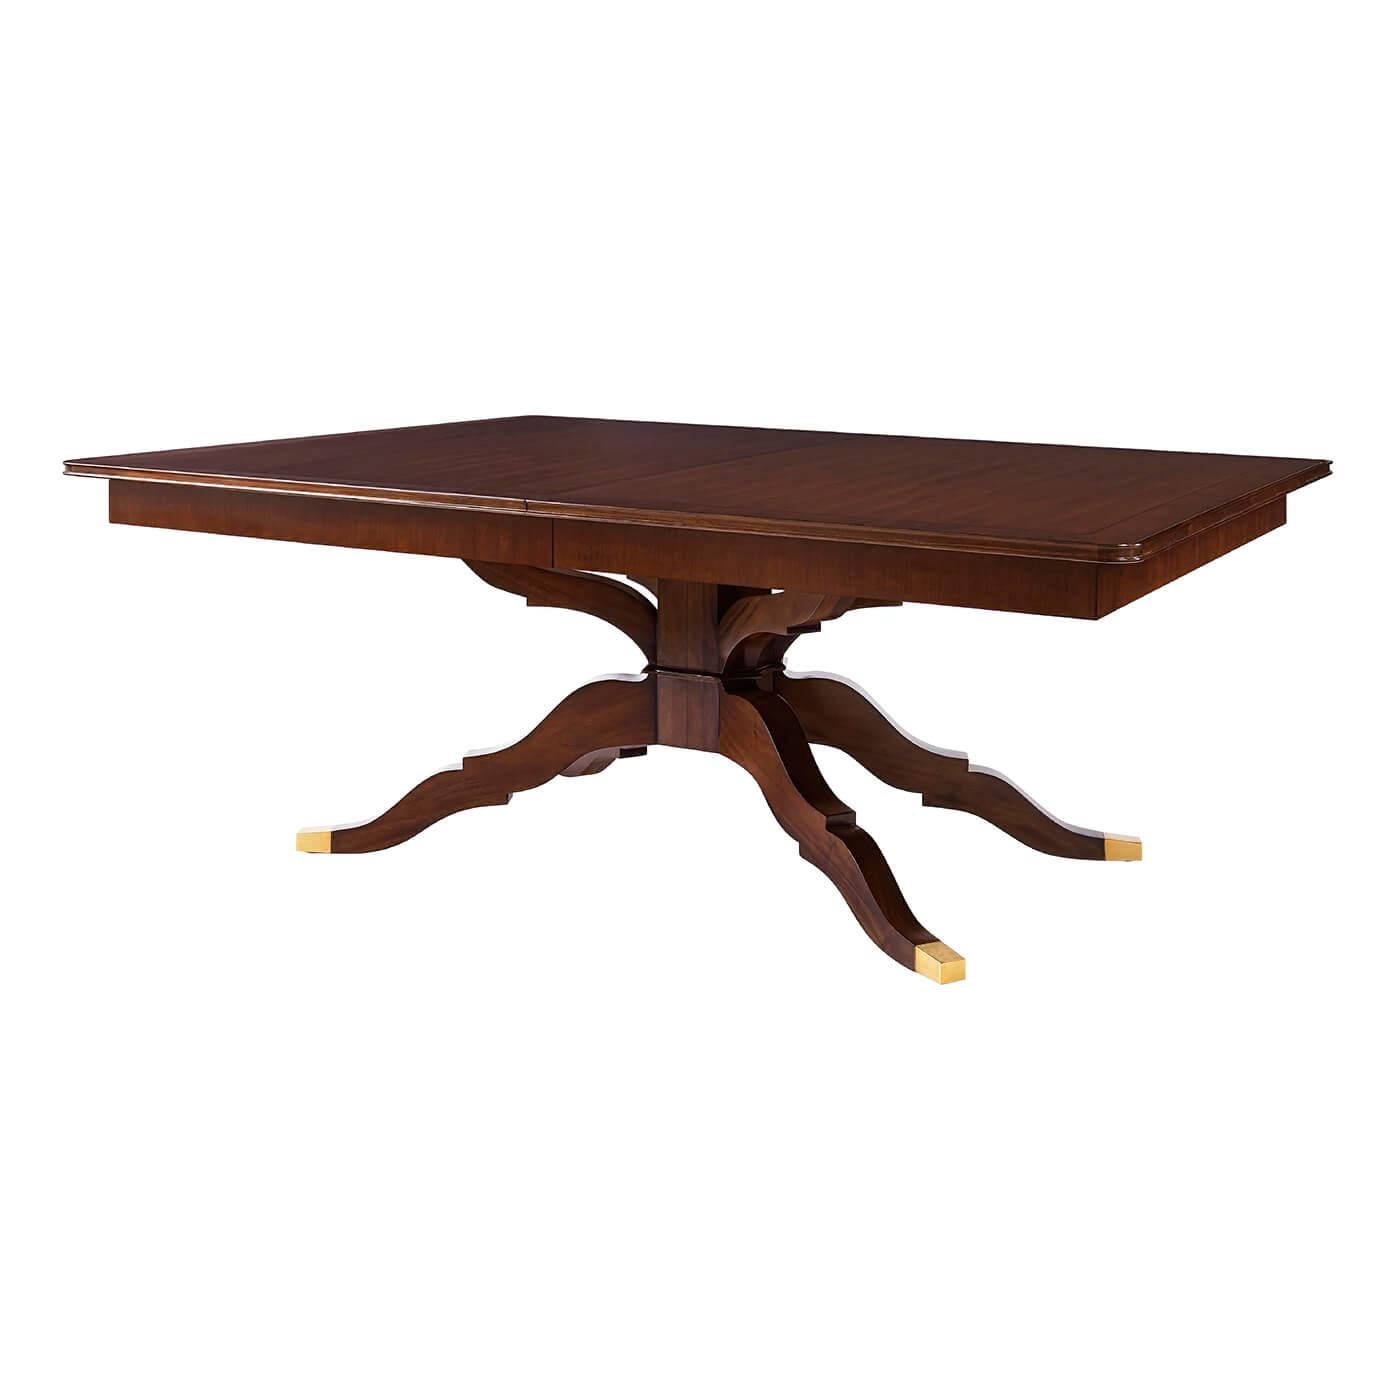 Midcentury style extension dining table with a line inlaid crossbanding and raised on an unusual four splay pedestal form base with brass sabots. Can seat up to 12 people.

Dimensions:
Open - 136